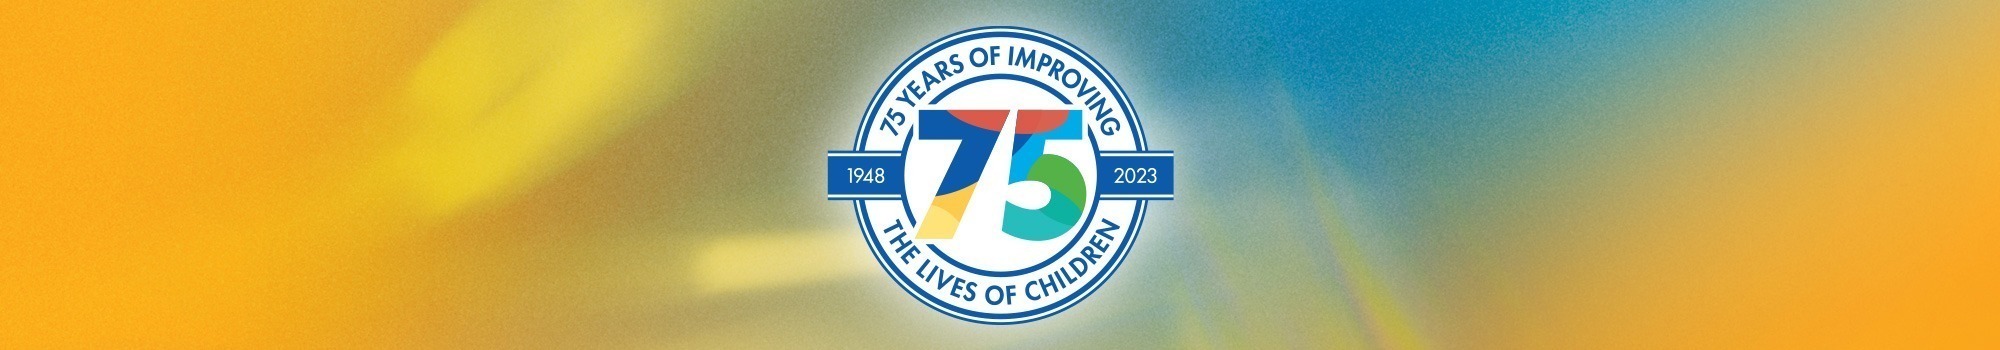 75 years of improving the lives of children